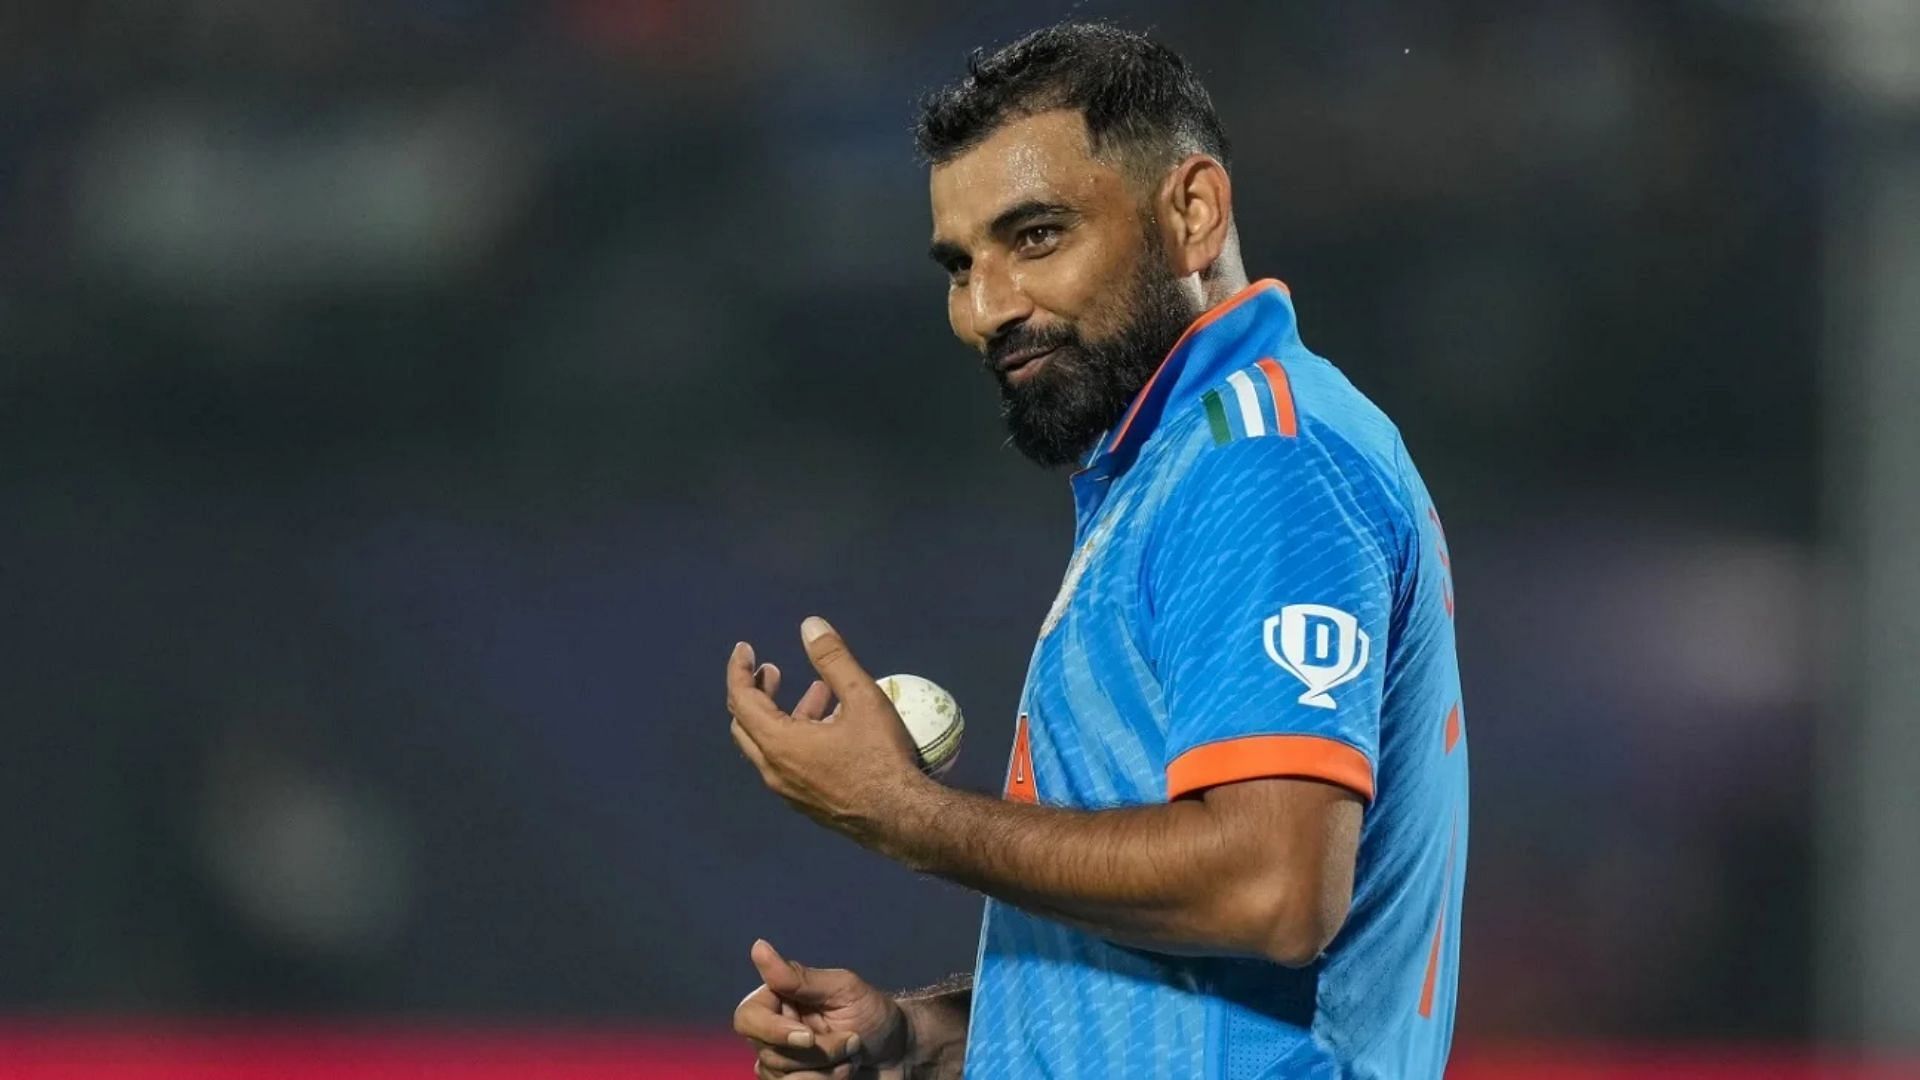 Mohammed Shami has averaged 4 wickets/match at this World Cup. (Image Courtesy: espncricinfo.com)